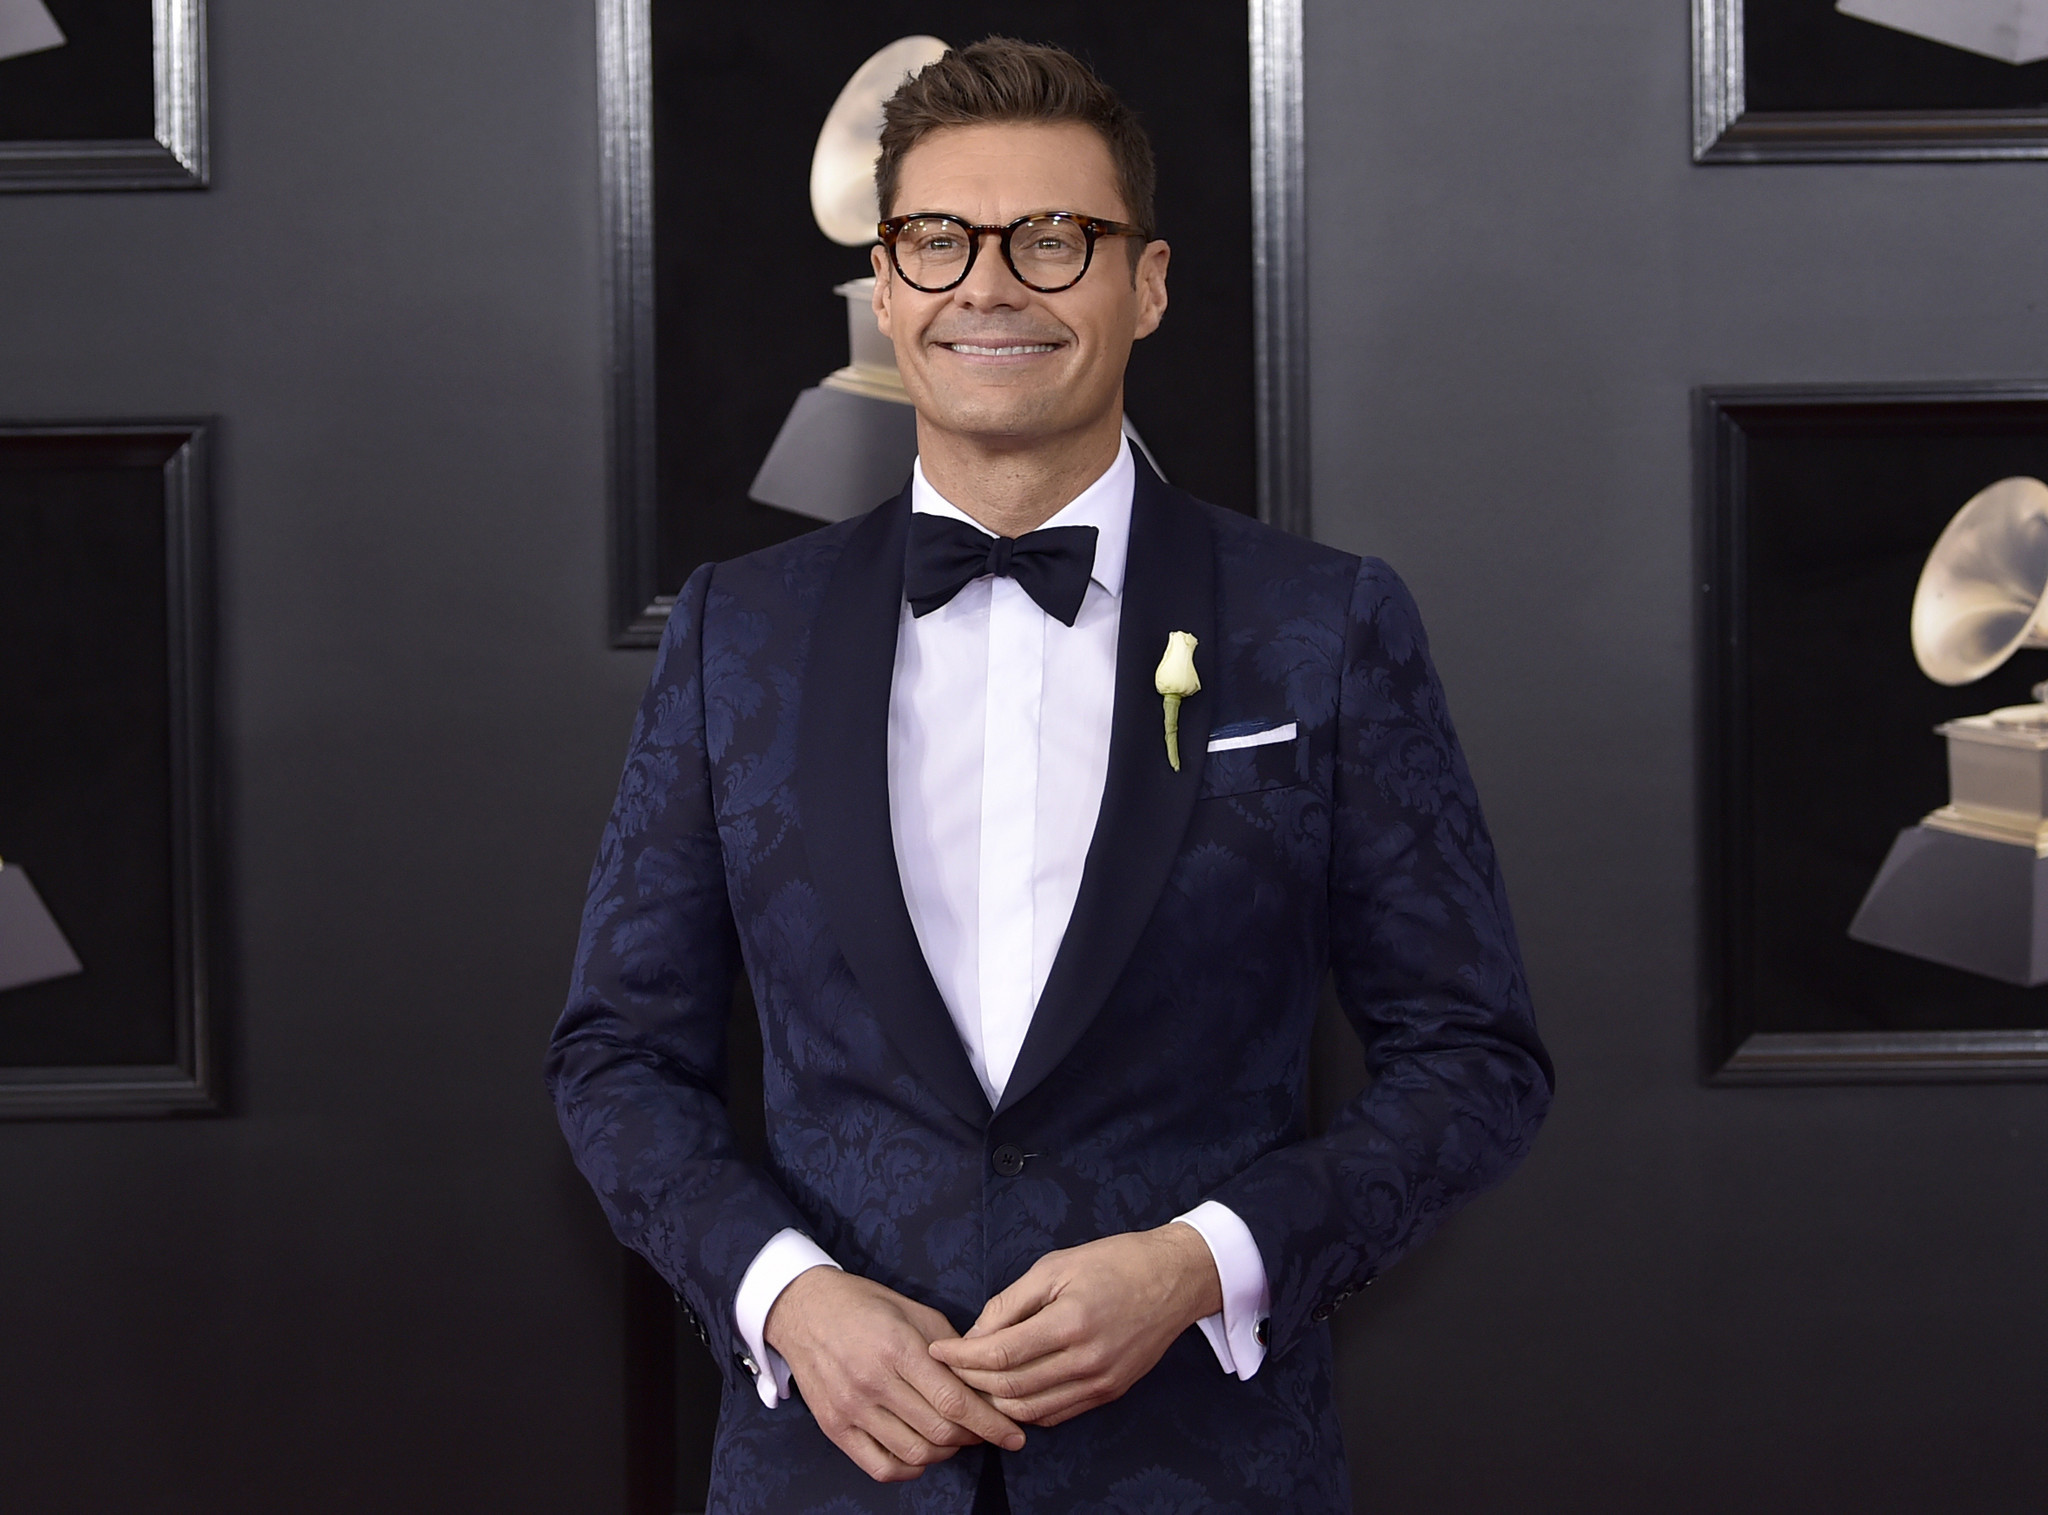 Oscars: Ryan Seacrest avoids #MeToo mentions, lands fewer A-listers on red carpet ...2048 x 1515